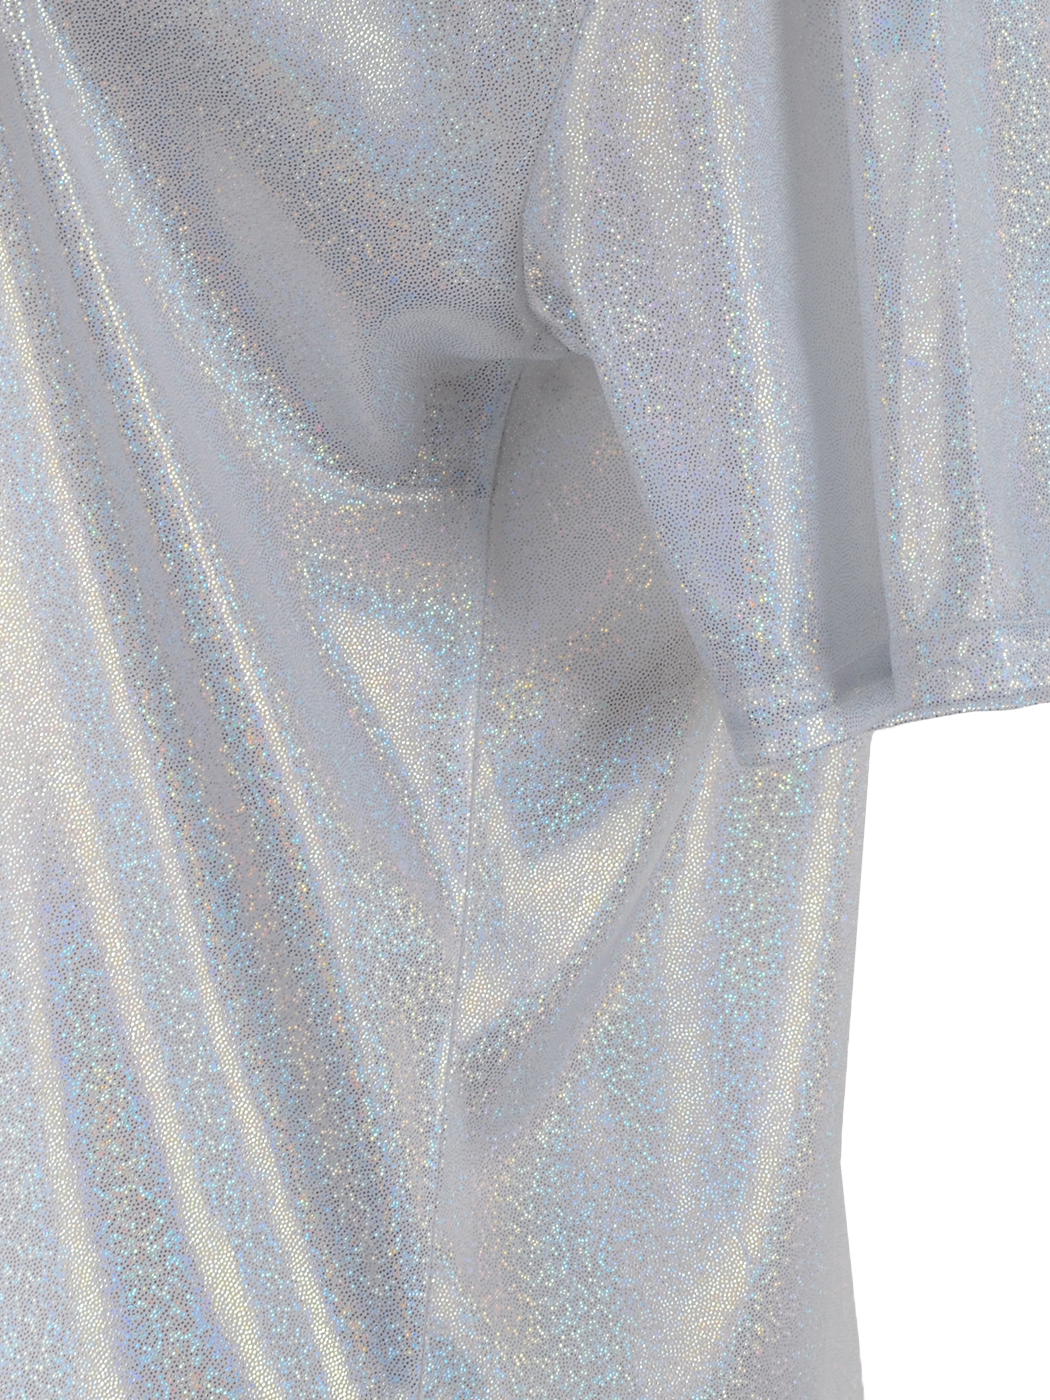 Women's Holographic Metallic Shirt Ultra Soft Top Glitter Party Disco Blouse - image 5 of 6